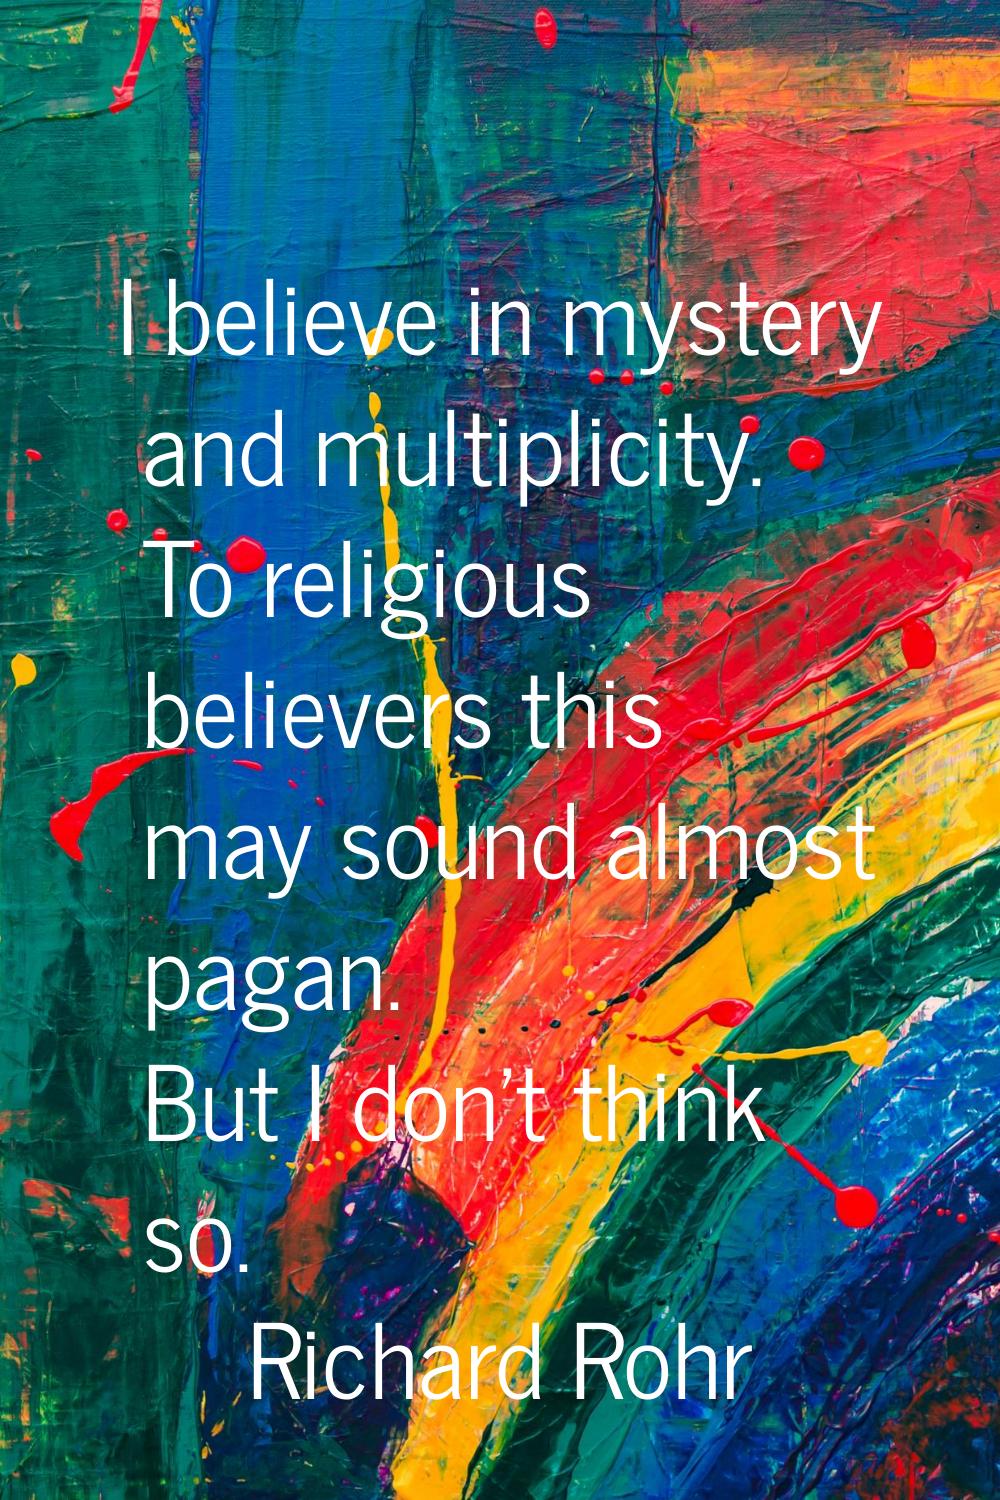 I believe in mystery and multiplicity. To religious believers this may sound almost pagan. But I do